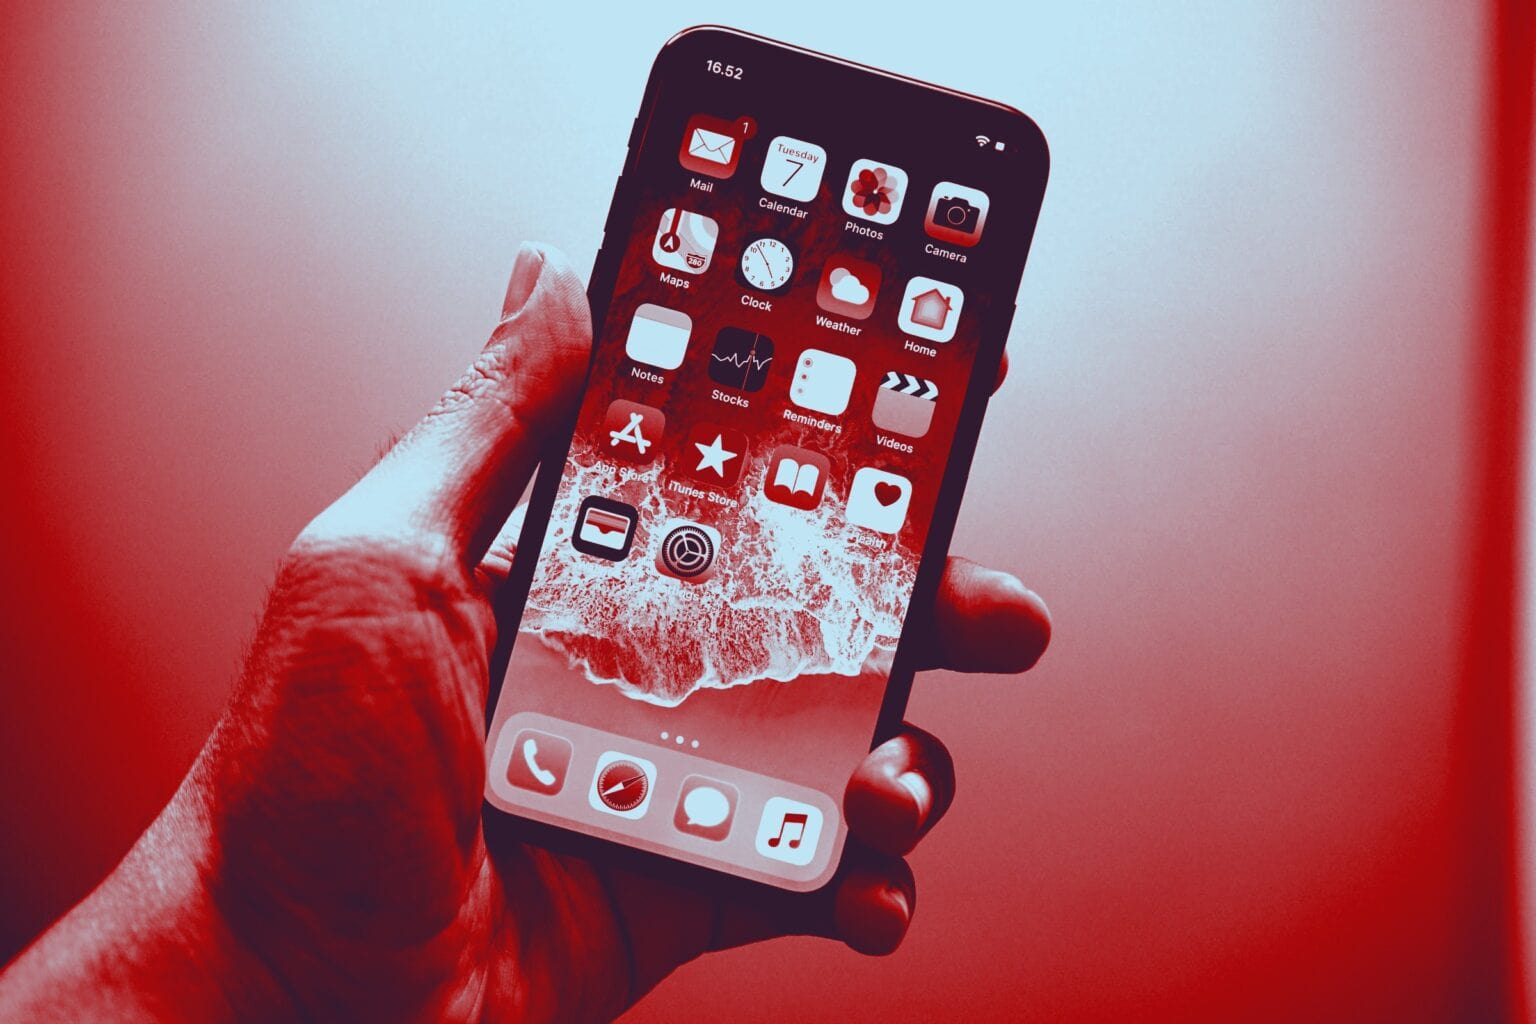 A red-tinted image of a hand holding an iPhone, meant to depict push notification spying.